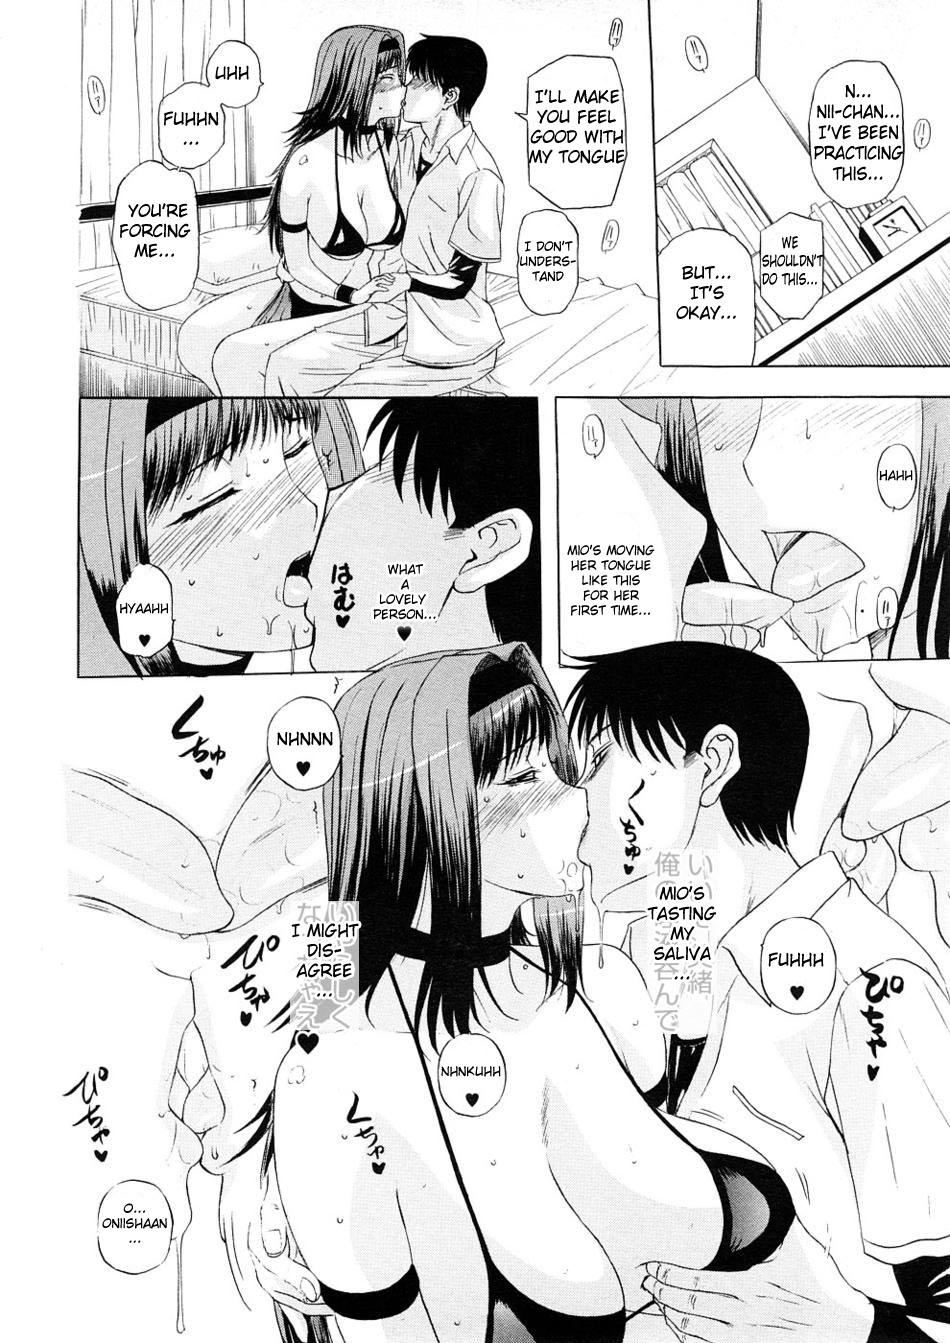 [Kusatsu Terunyo] Imokoi Musou - Younger Sister's Love Hit and Miss [ENG] page 8 full